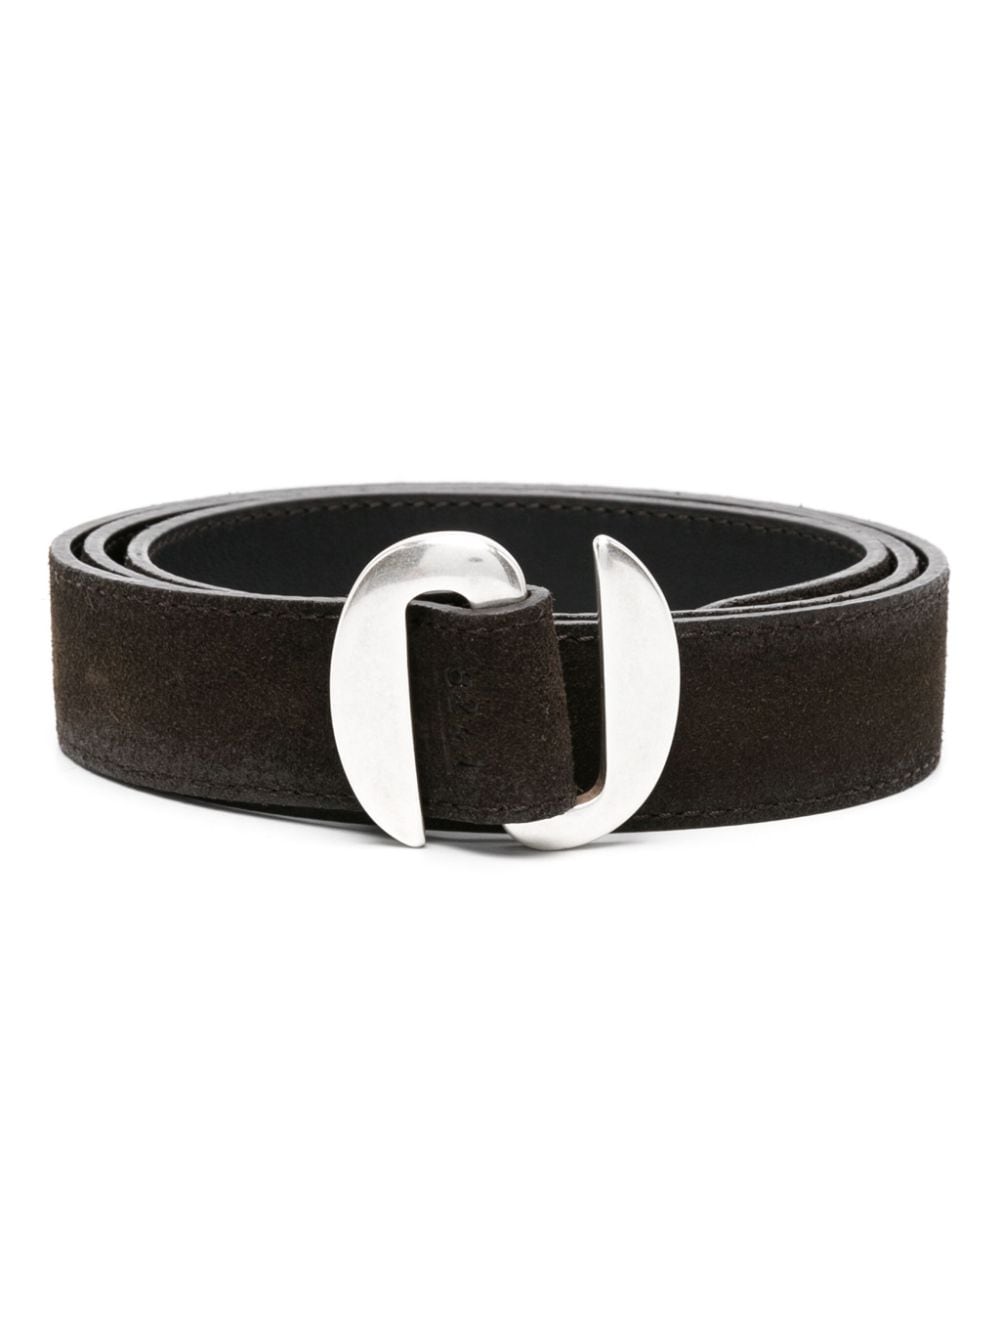 Orciani buckled suede belt - Brown von Orciani